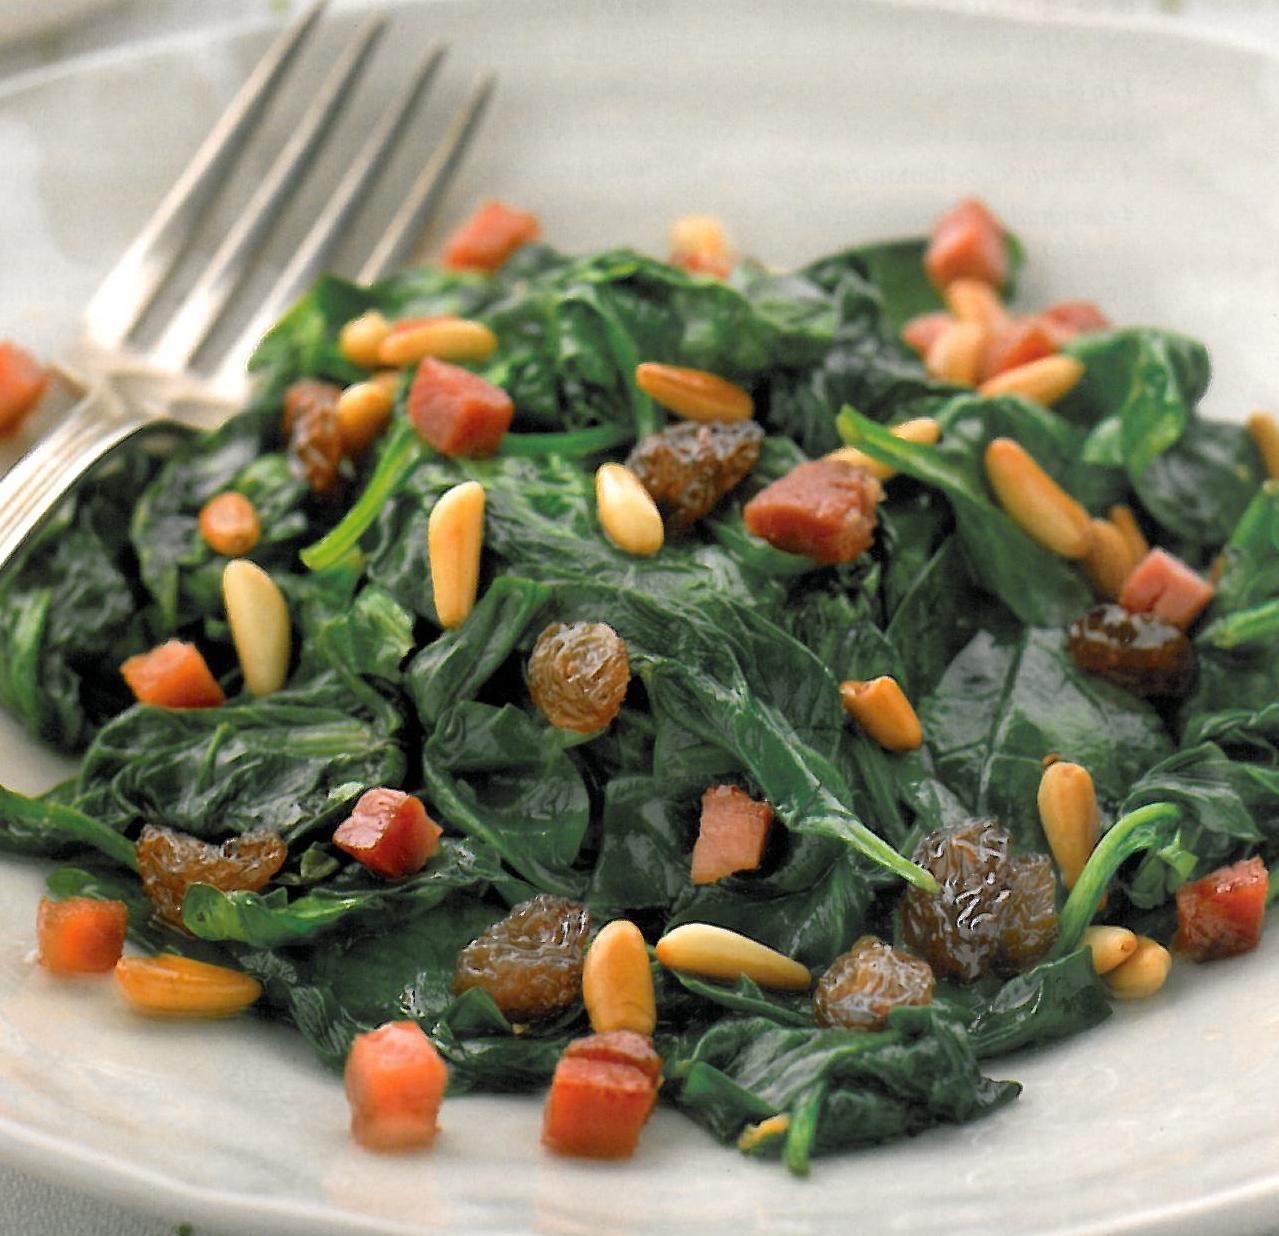 Spinach with Raisins and Pine Nuts